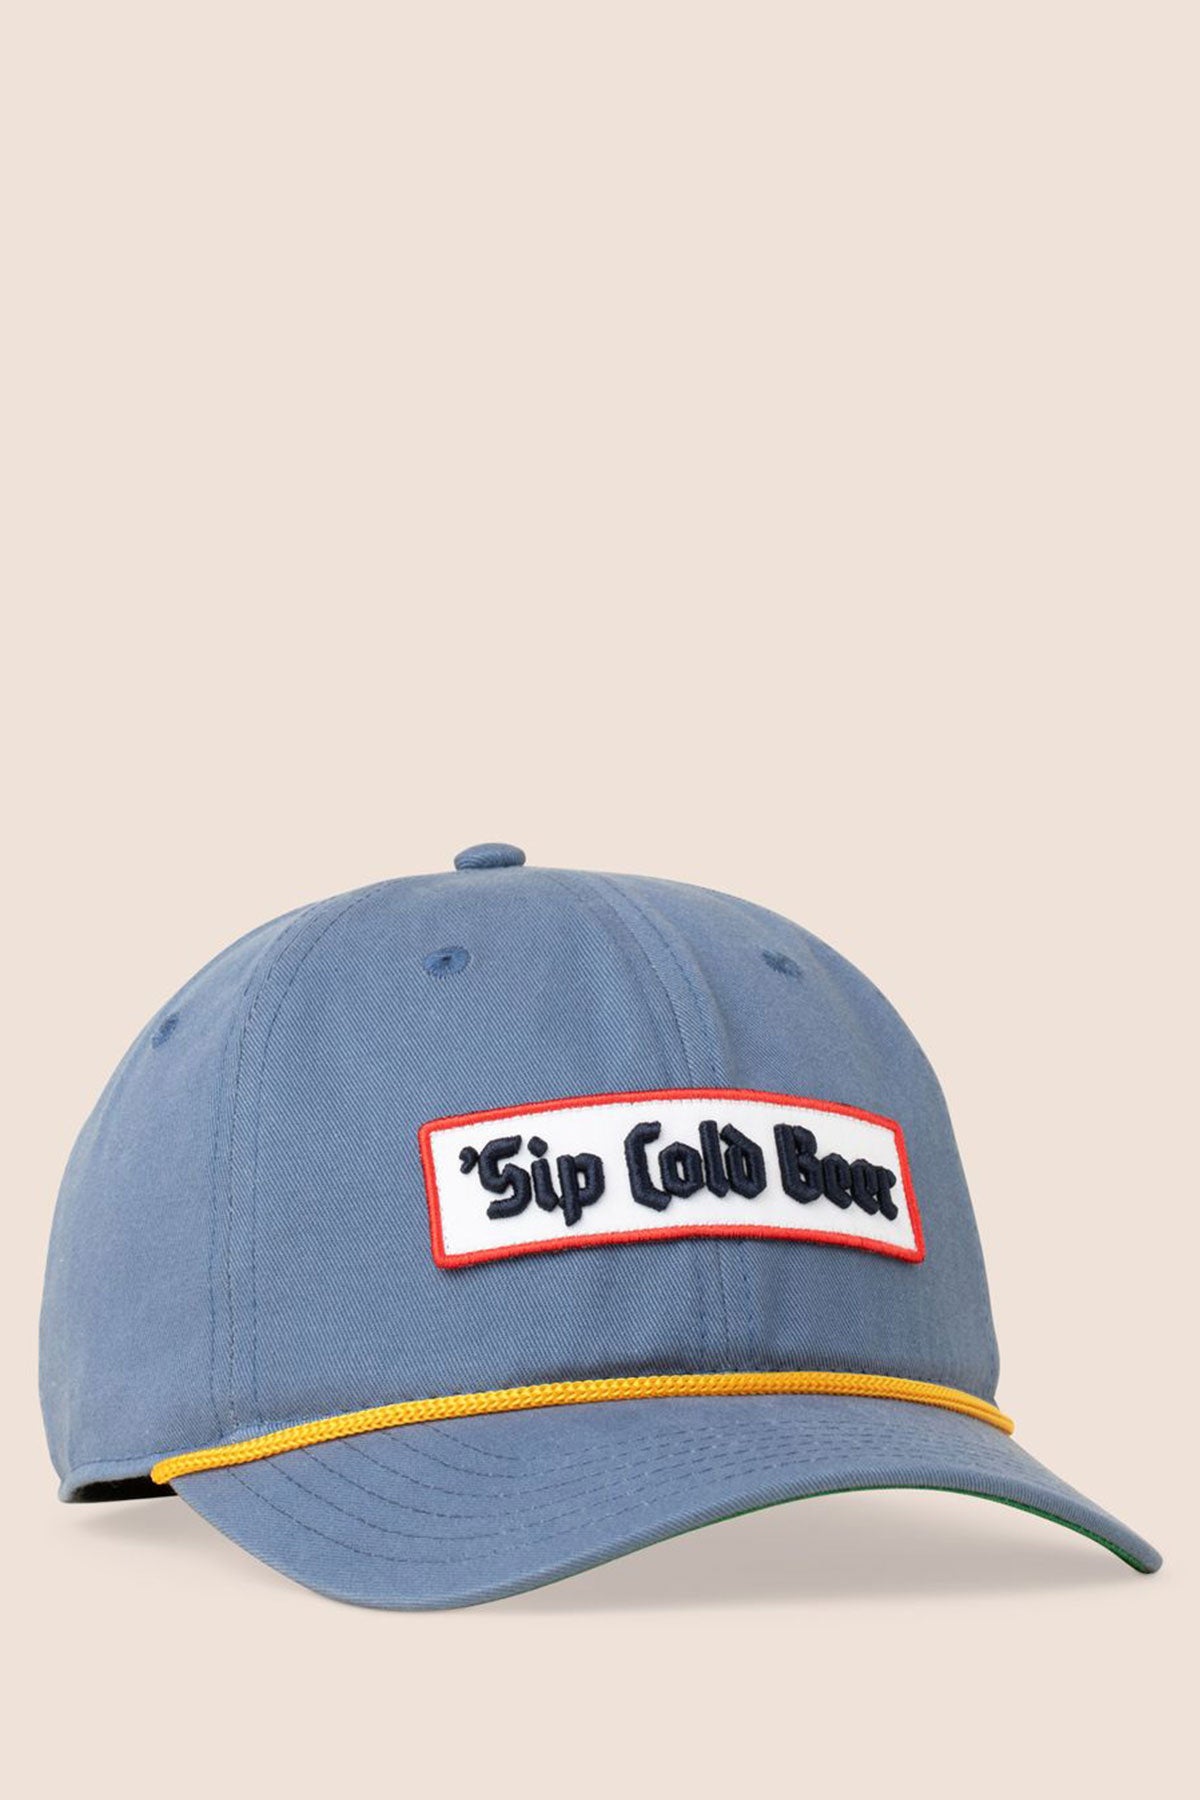 Sip Cold Beer / Cotton Twill